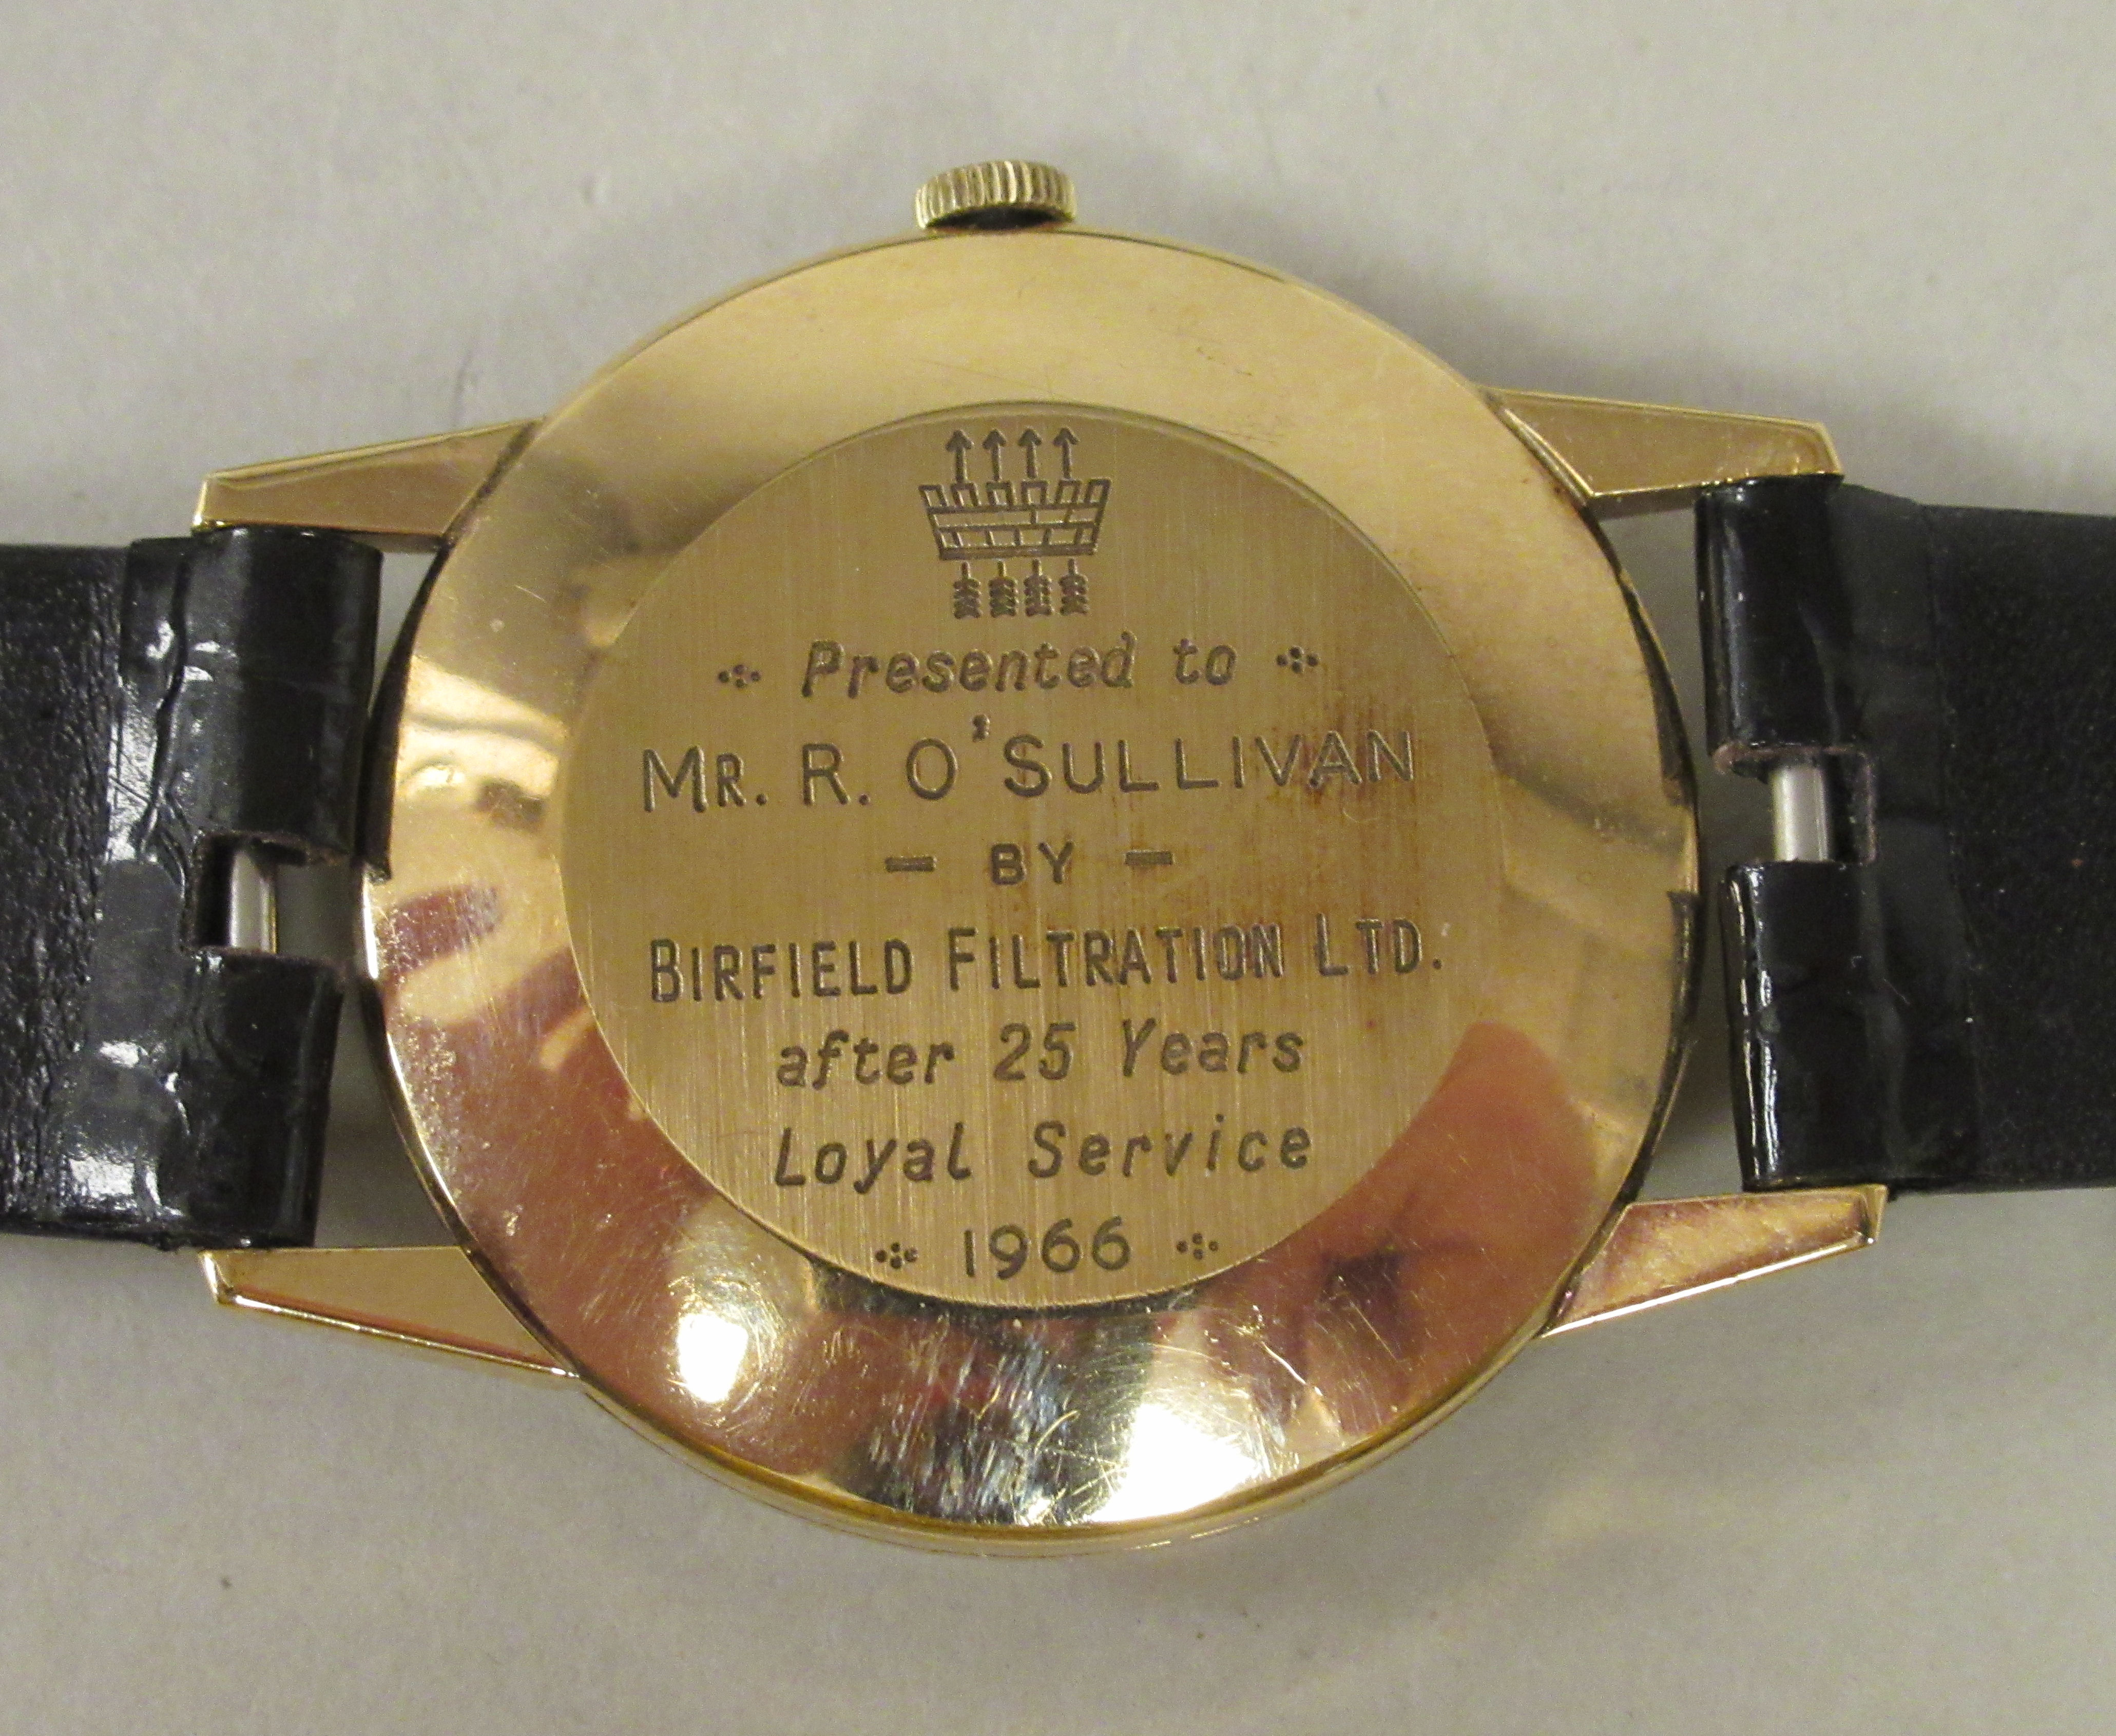 A 1960s Girard-Perregaux 9ct gold cased wristwatch, the movement with sweeping seconds, faced by a - Image 4 of 4